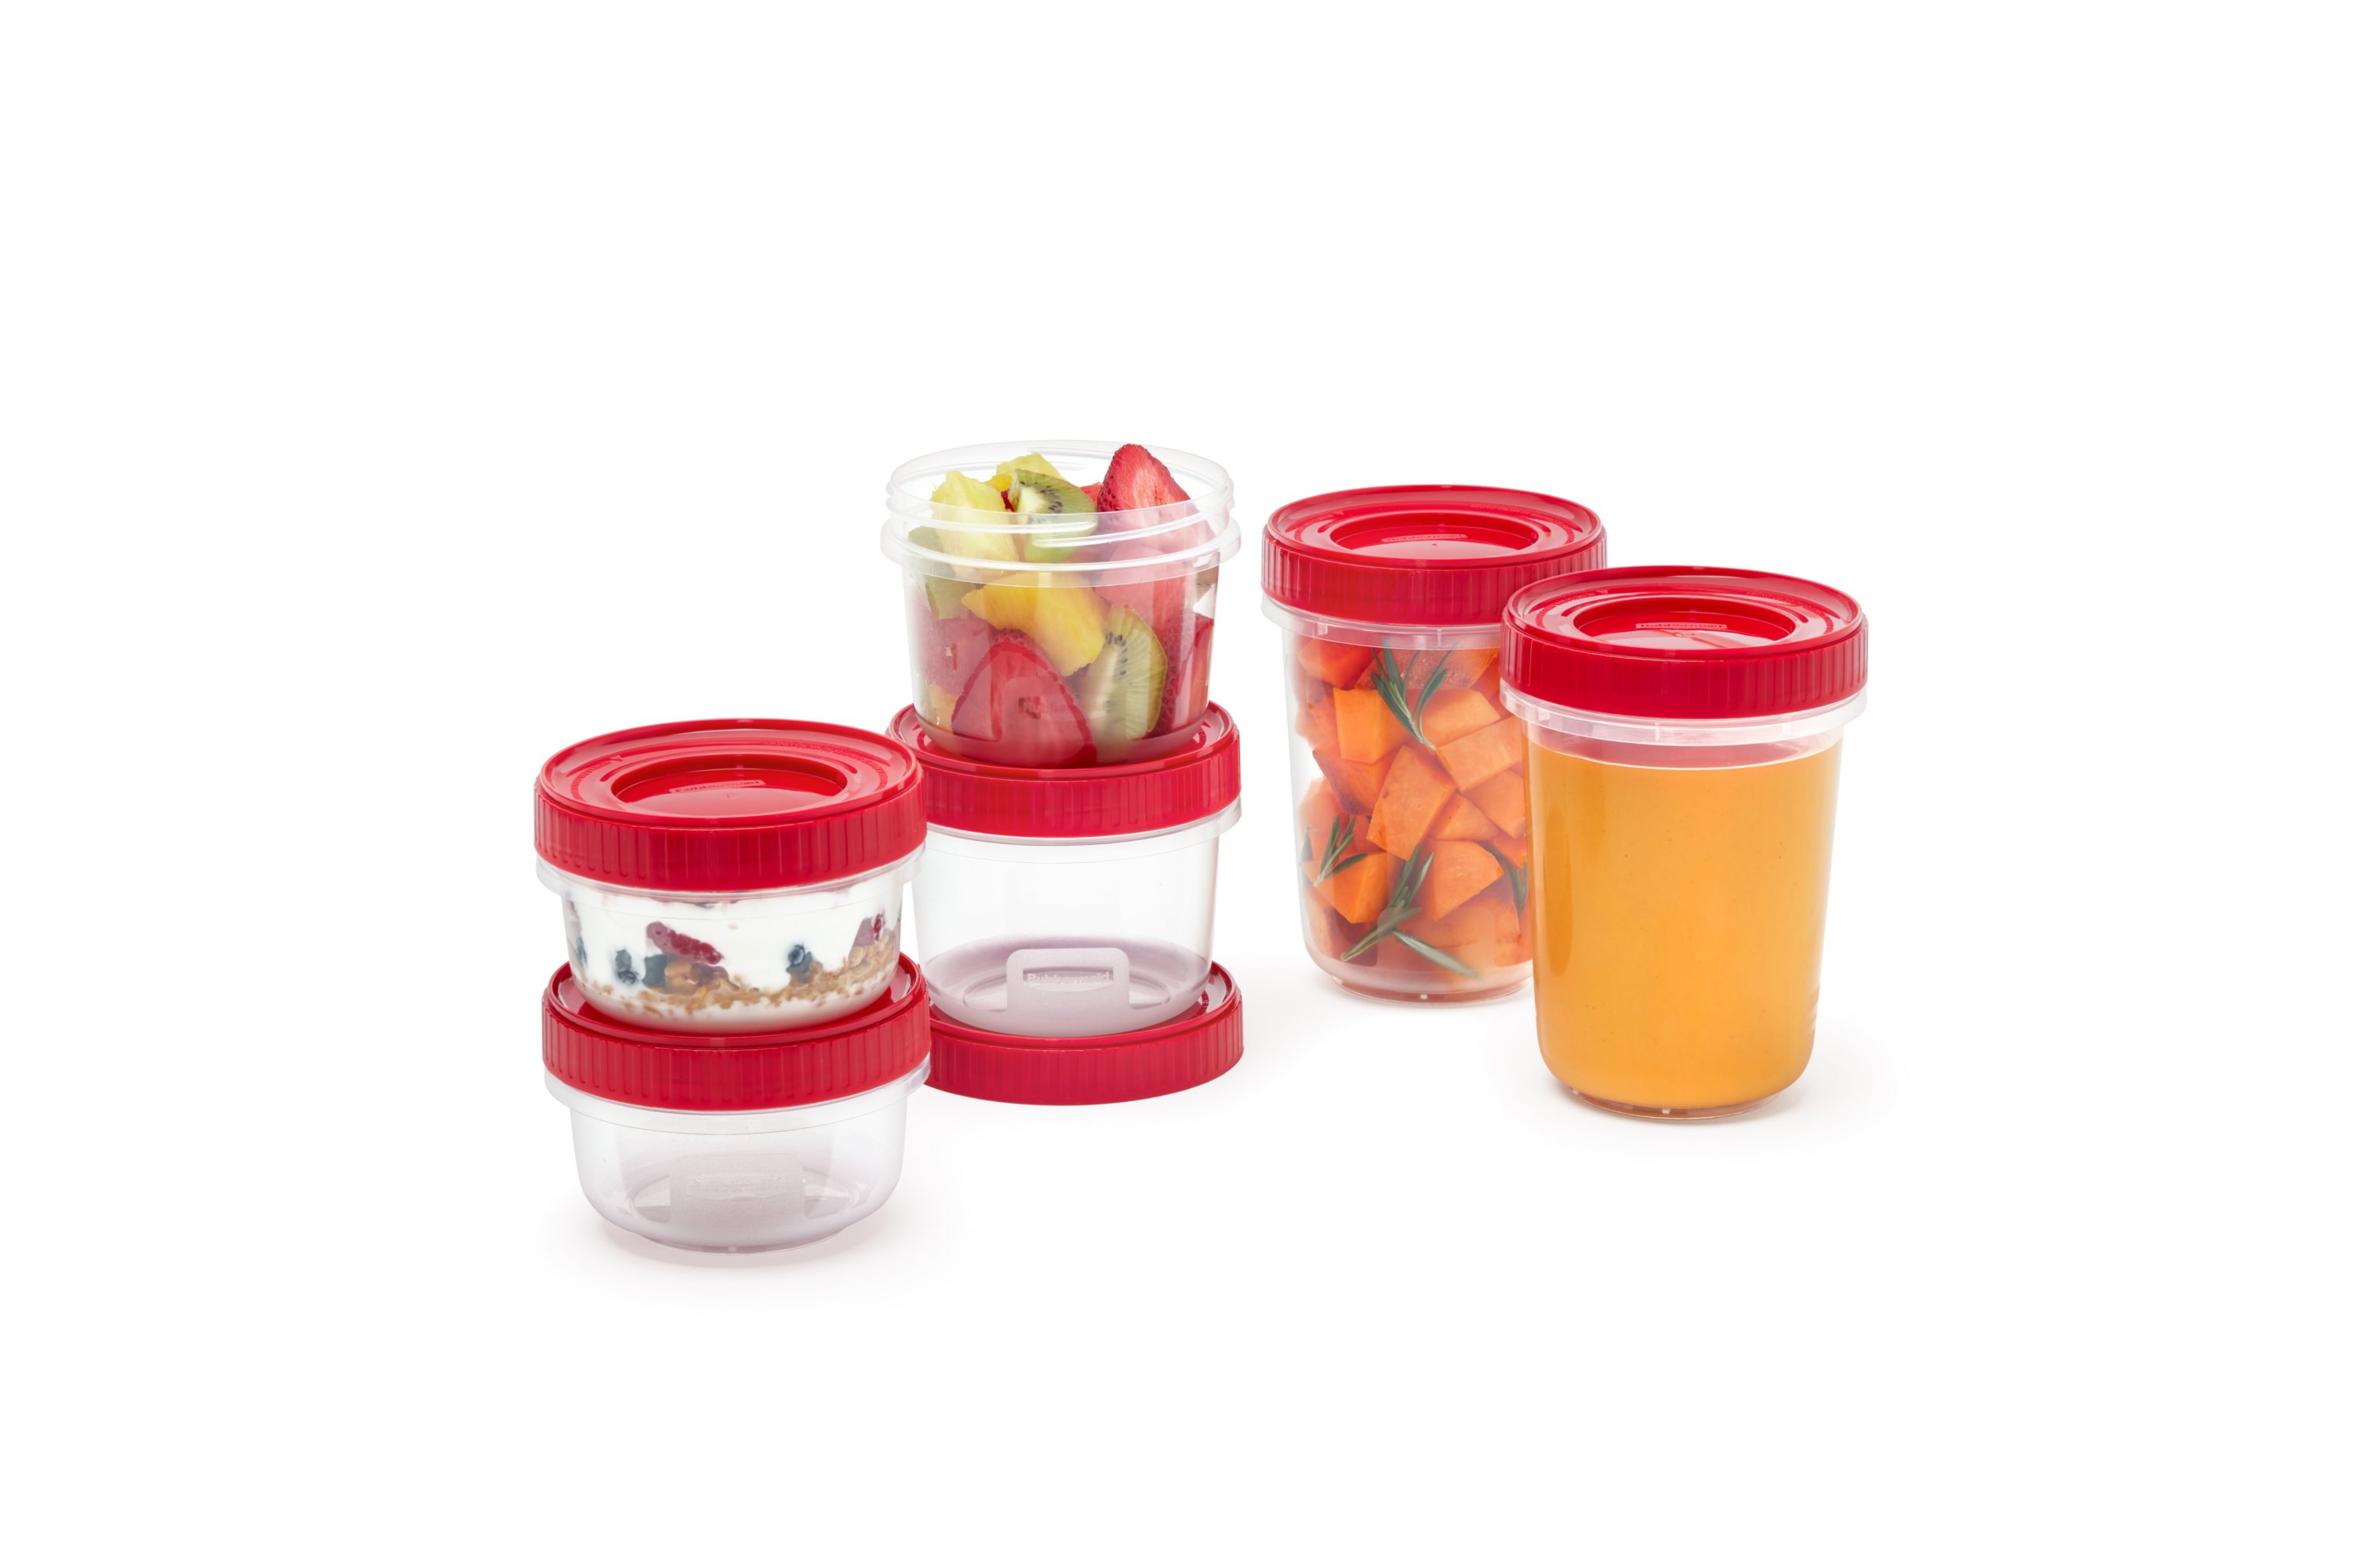 Rubbermaid TakeAlongs Twist & Seal Food Storage Containers